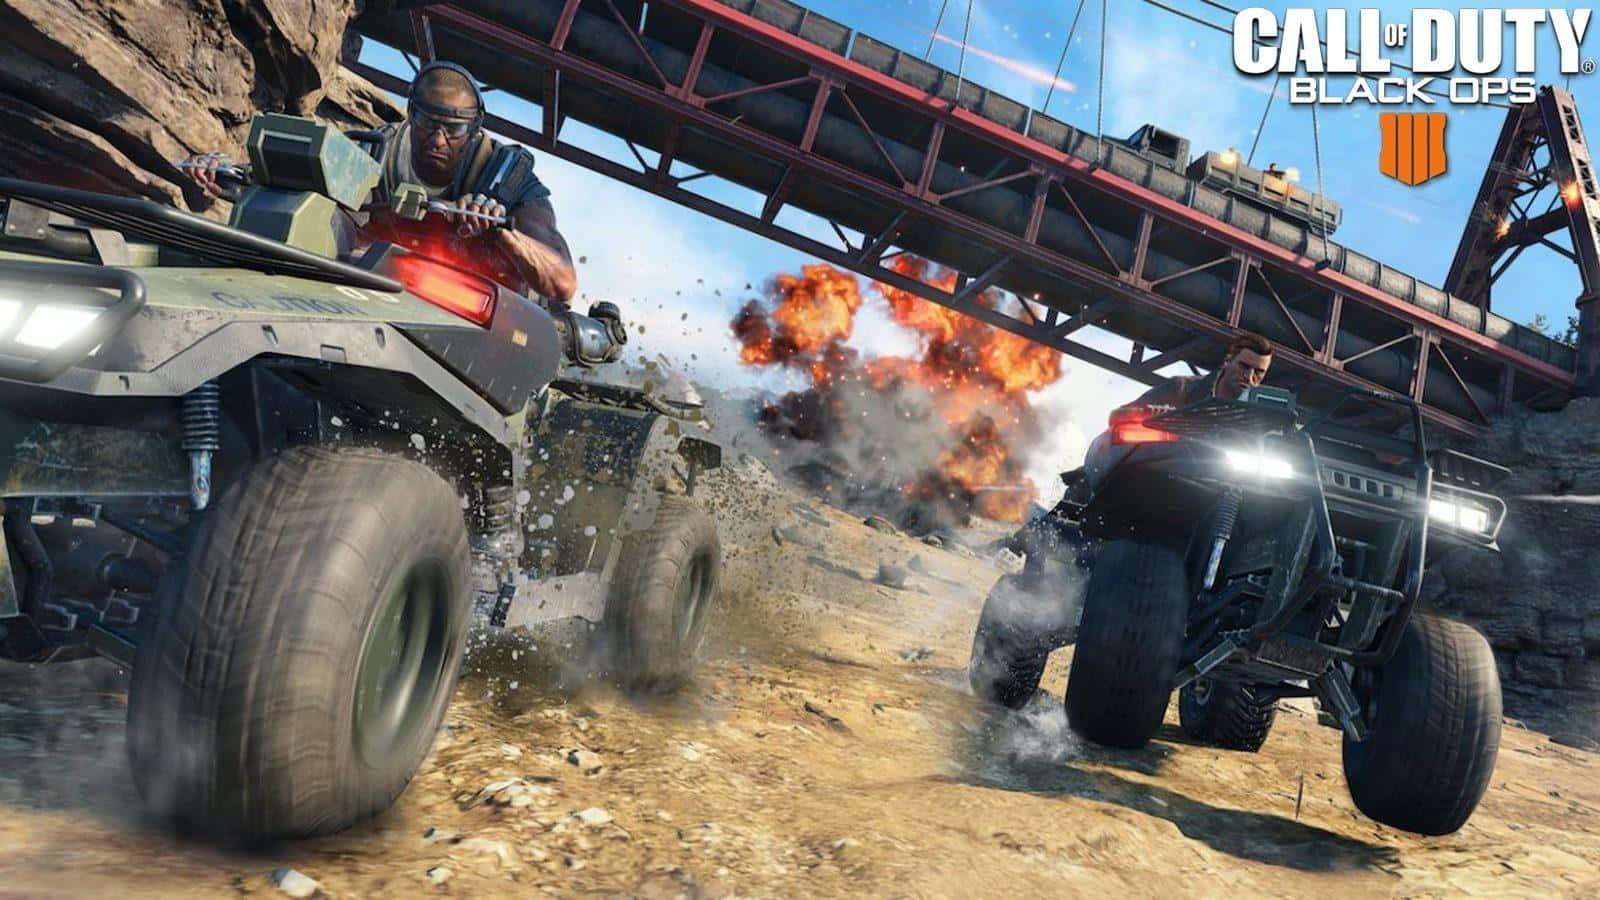 Intense Battle Scene with Call of Duty Vehicles Wallpaper